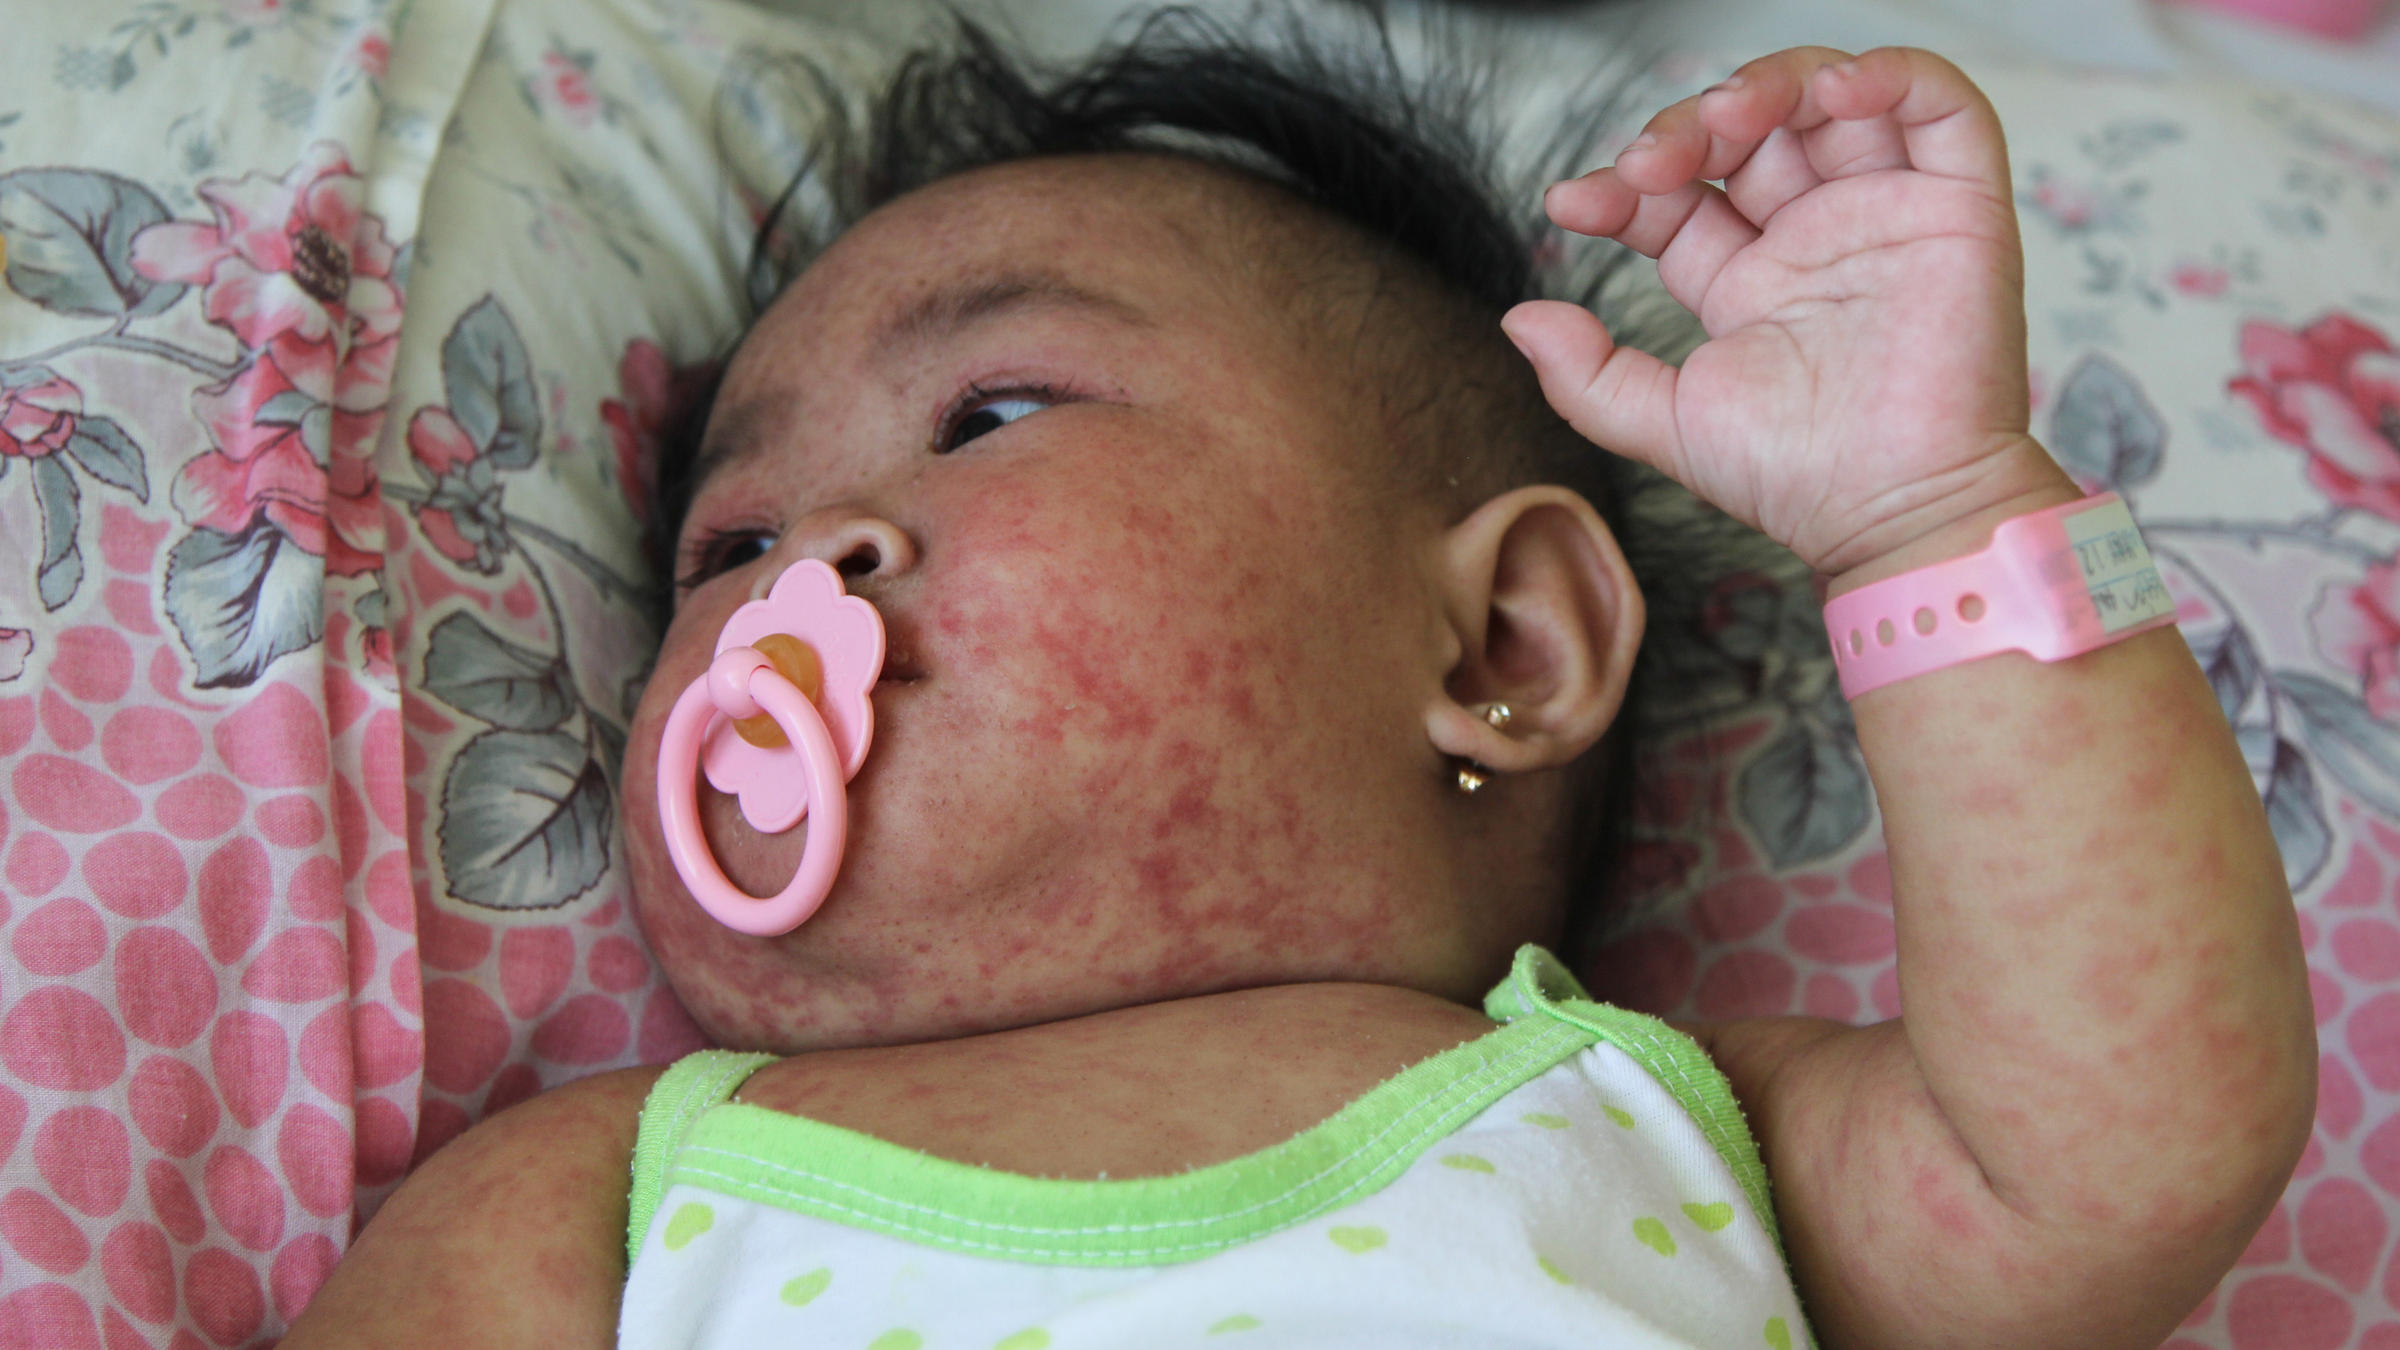 The Philippines Is Fighting One Of The World's Worst Measles Outbreaks